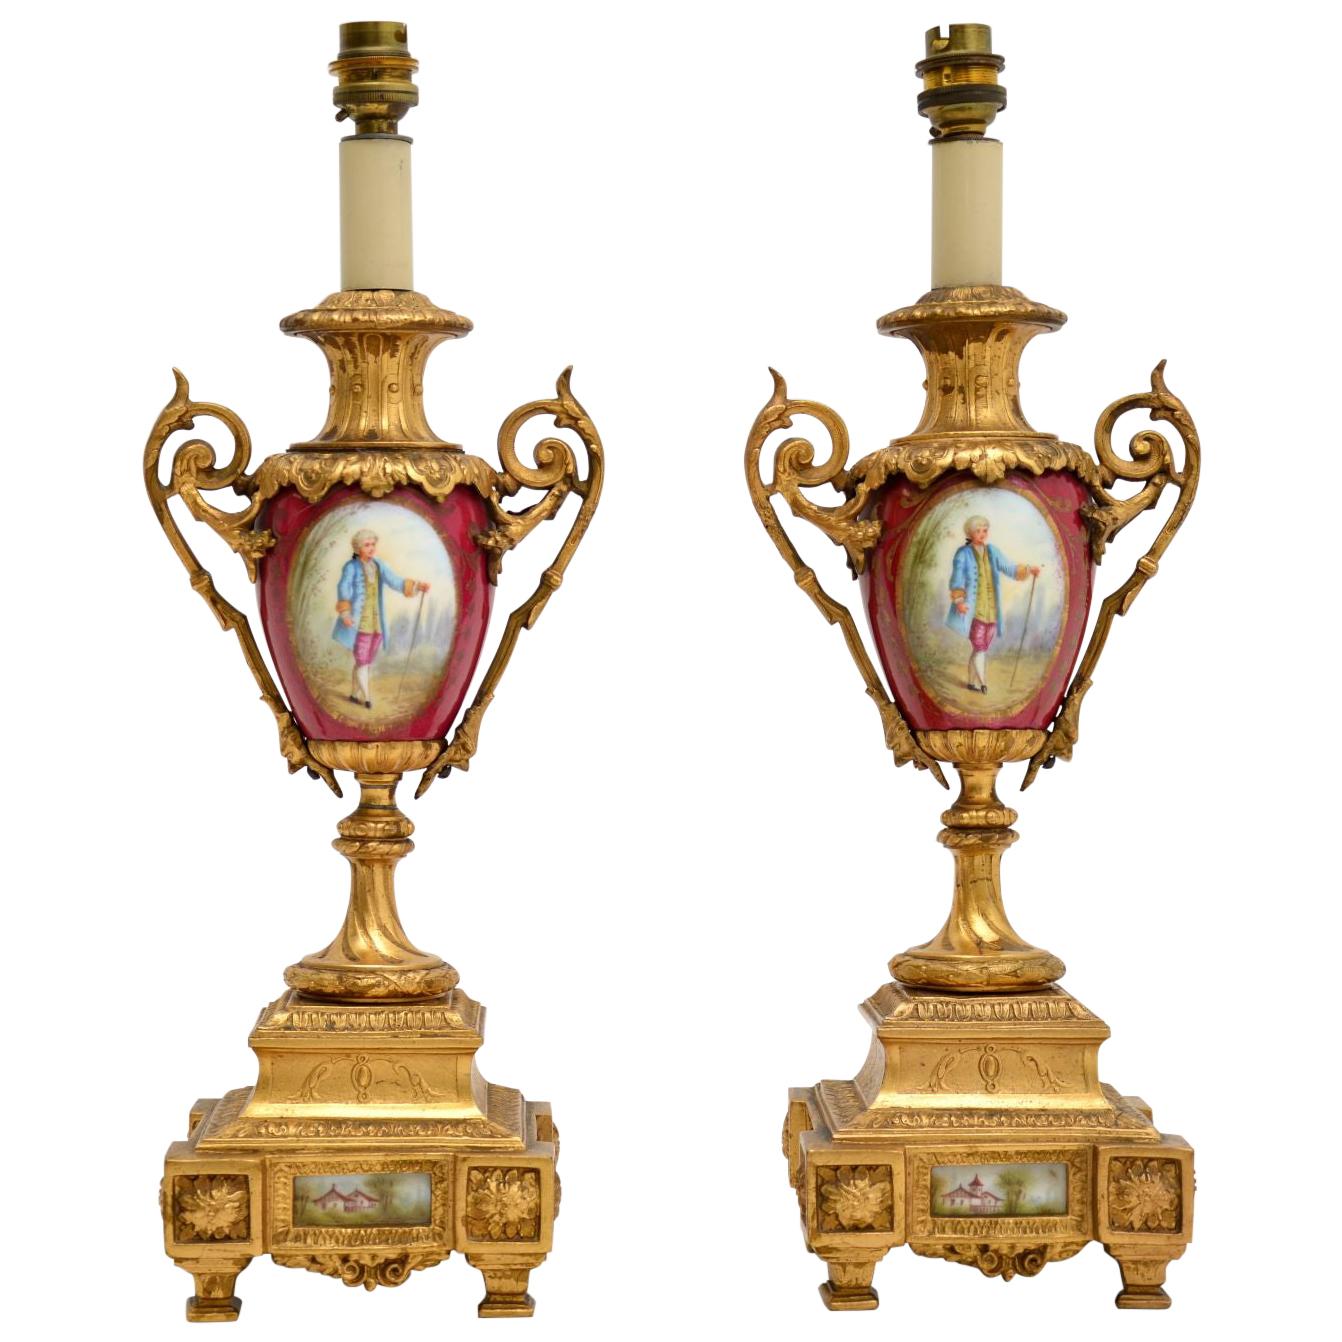 Pair of Antique French Porcelain & Gilt Metal Table Lamps